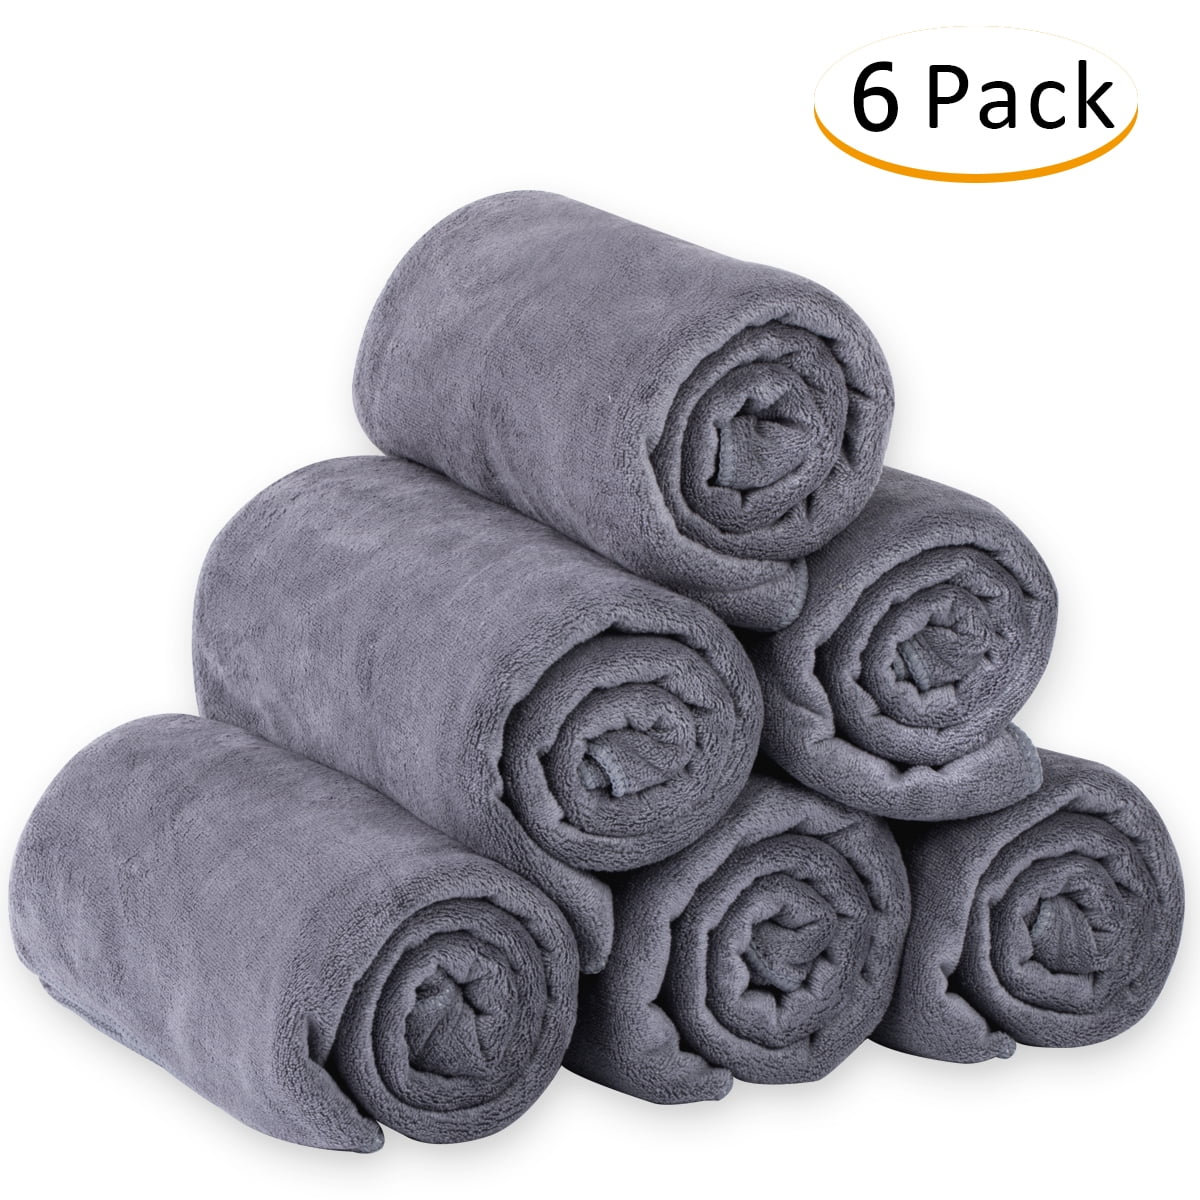 2 Pack Microfiber Towel Set Absorbent Quick Drying Antibacterial FAST SHIPPING! 